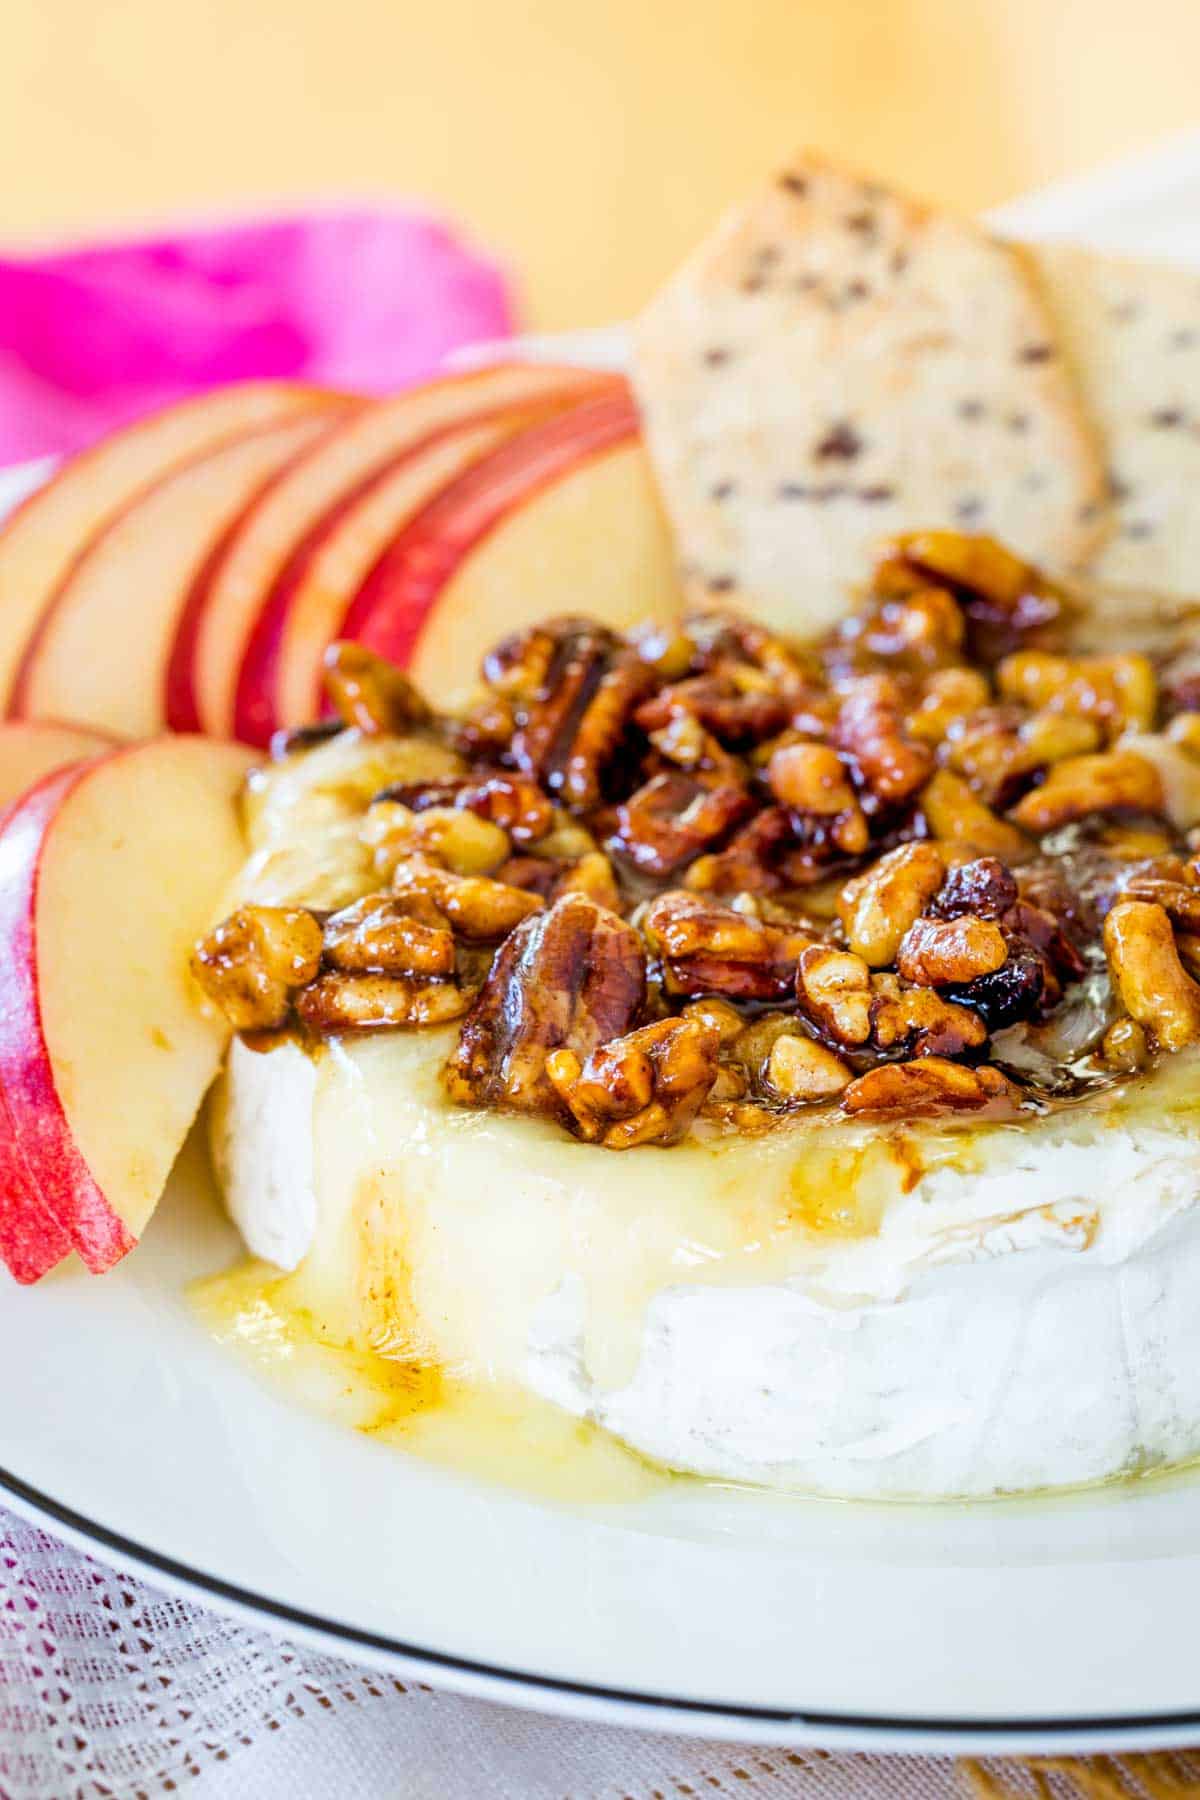 A round of honey nut baked brie with some of the cheese oozing onto the plate